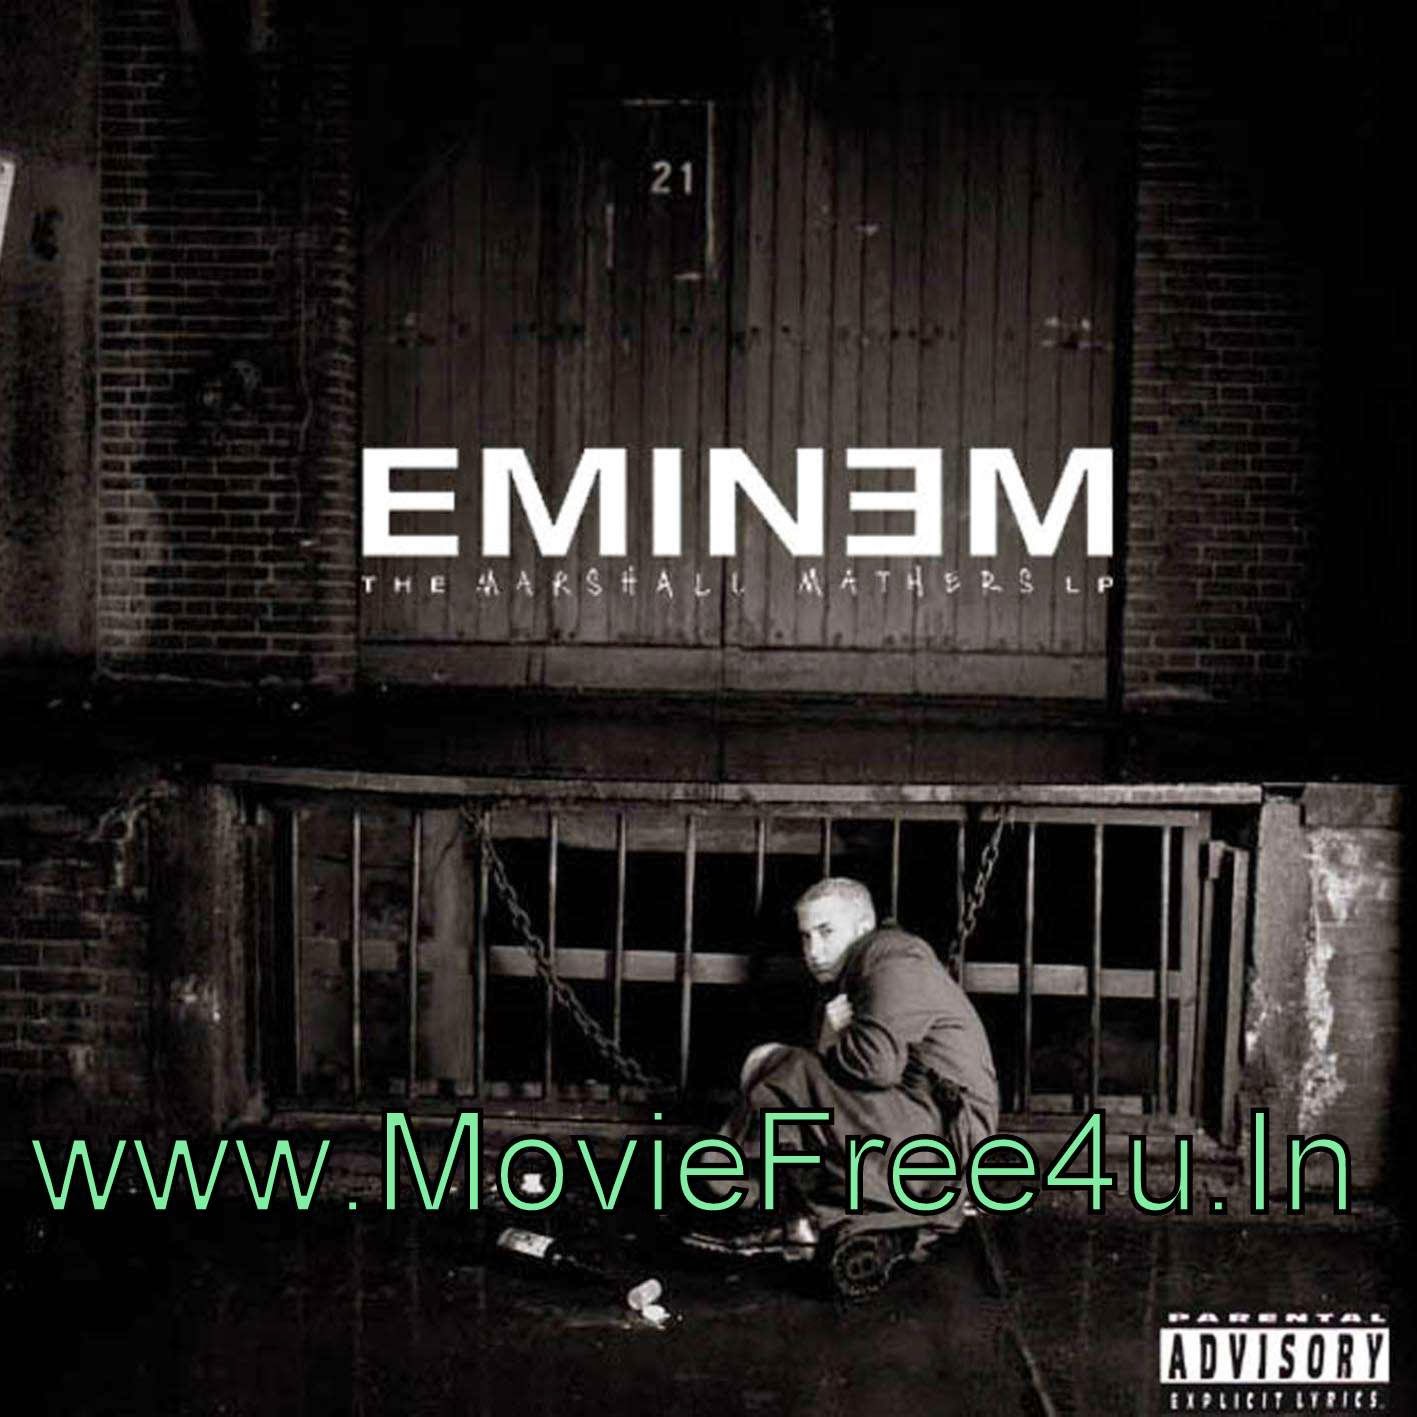 Eminem the marshall mathers lp download